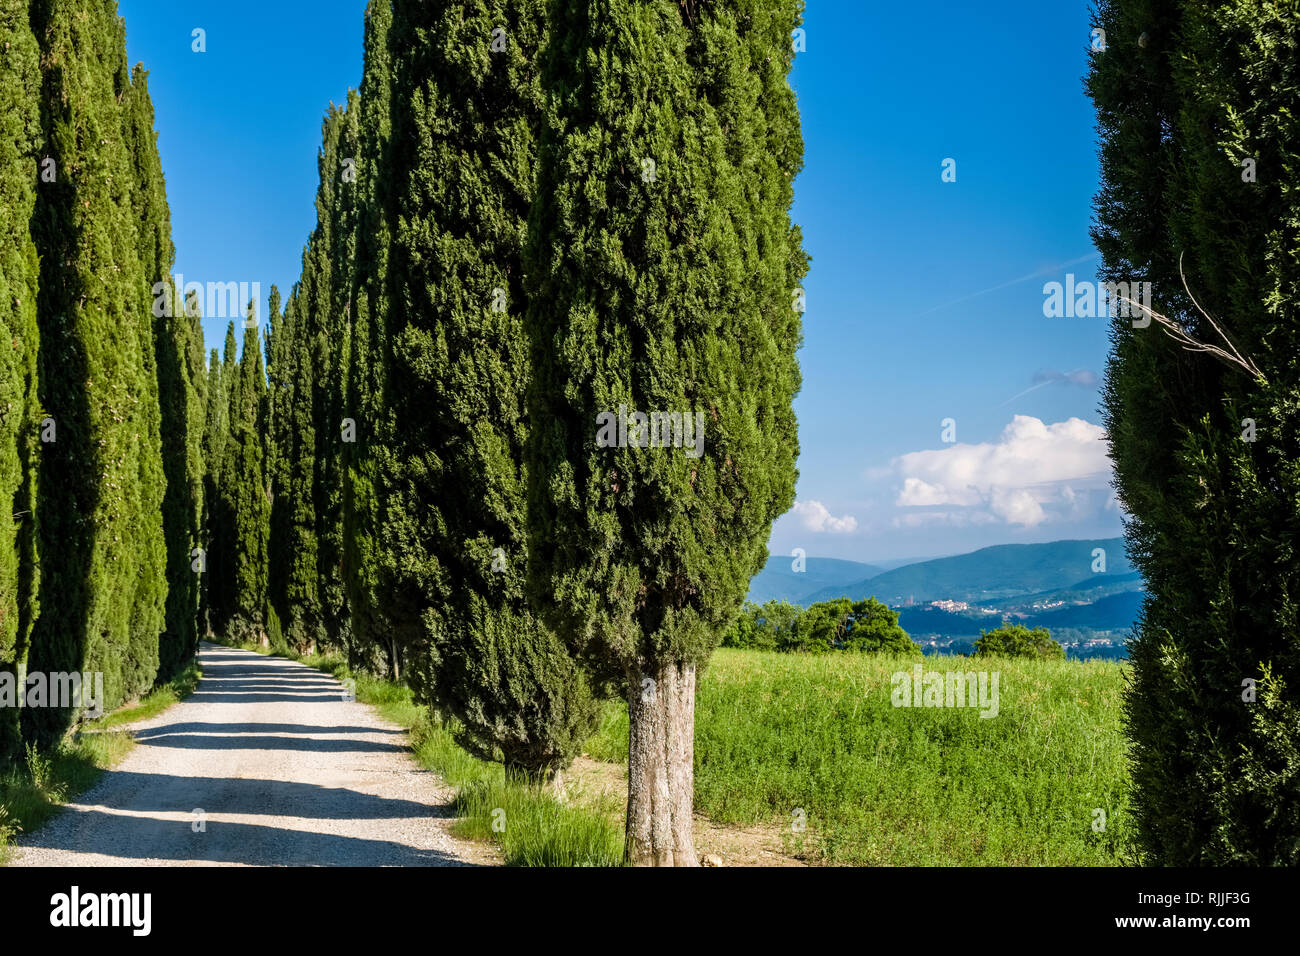 Typical hilly Tuscan countryside with fields and trees, cypress avenue leading to Castello di Romena Stock Photo